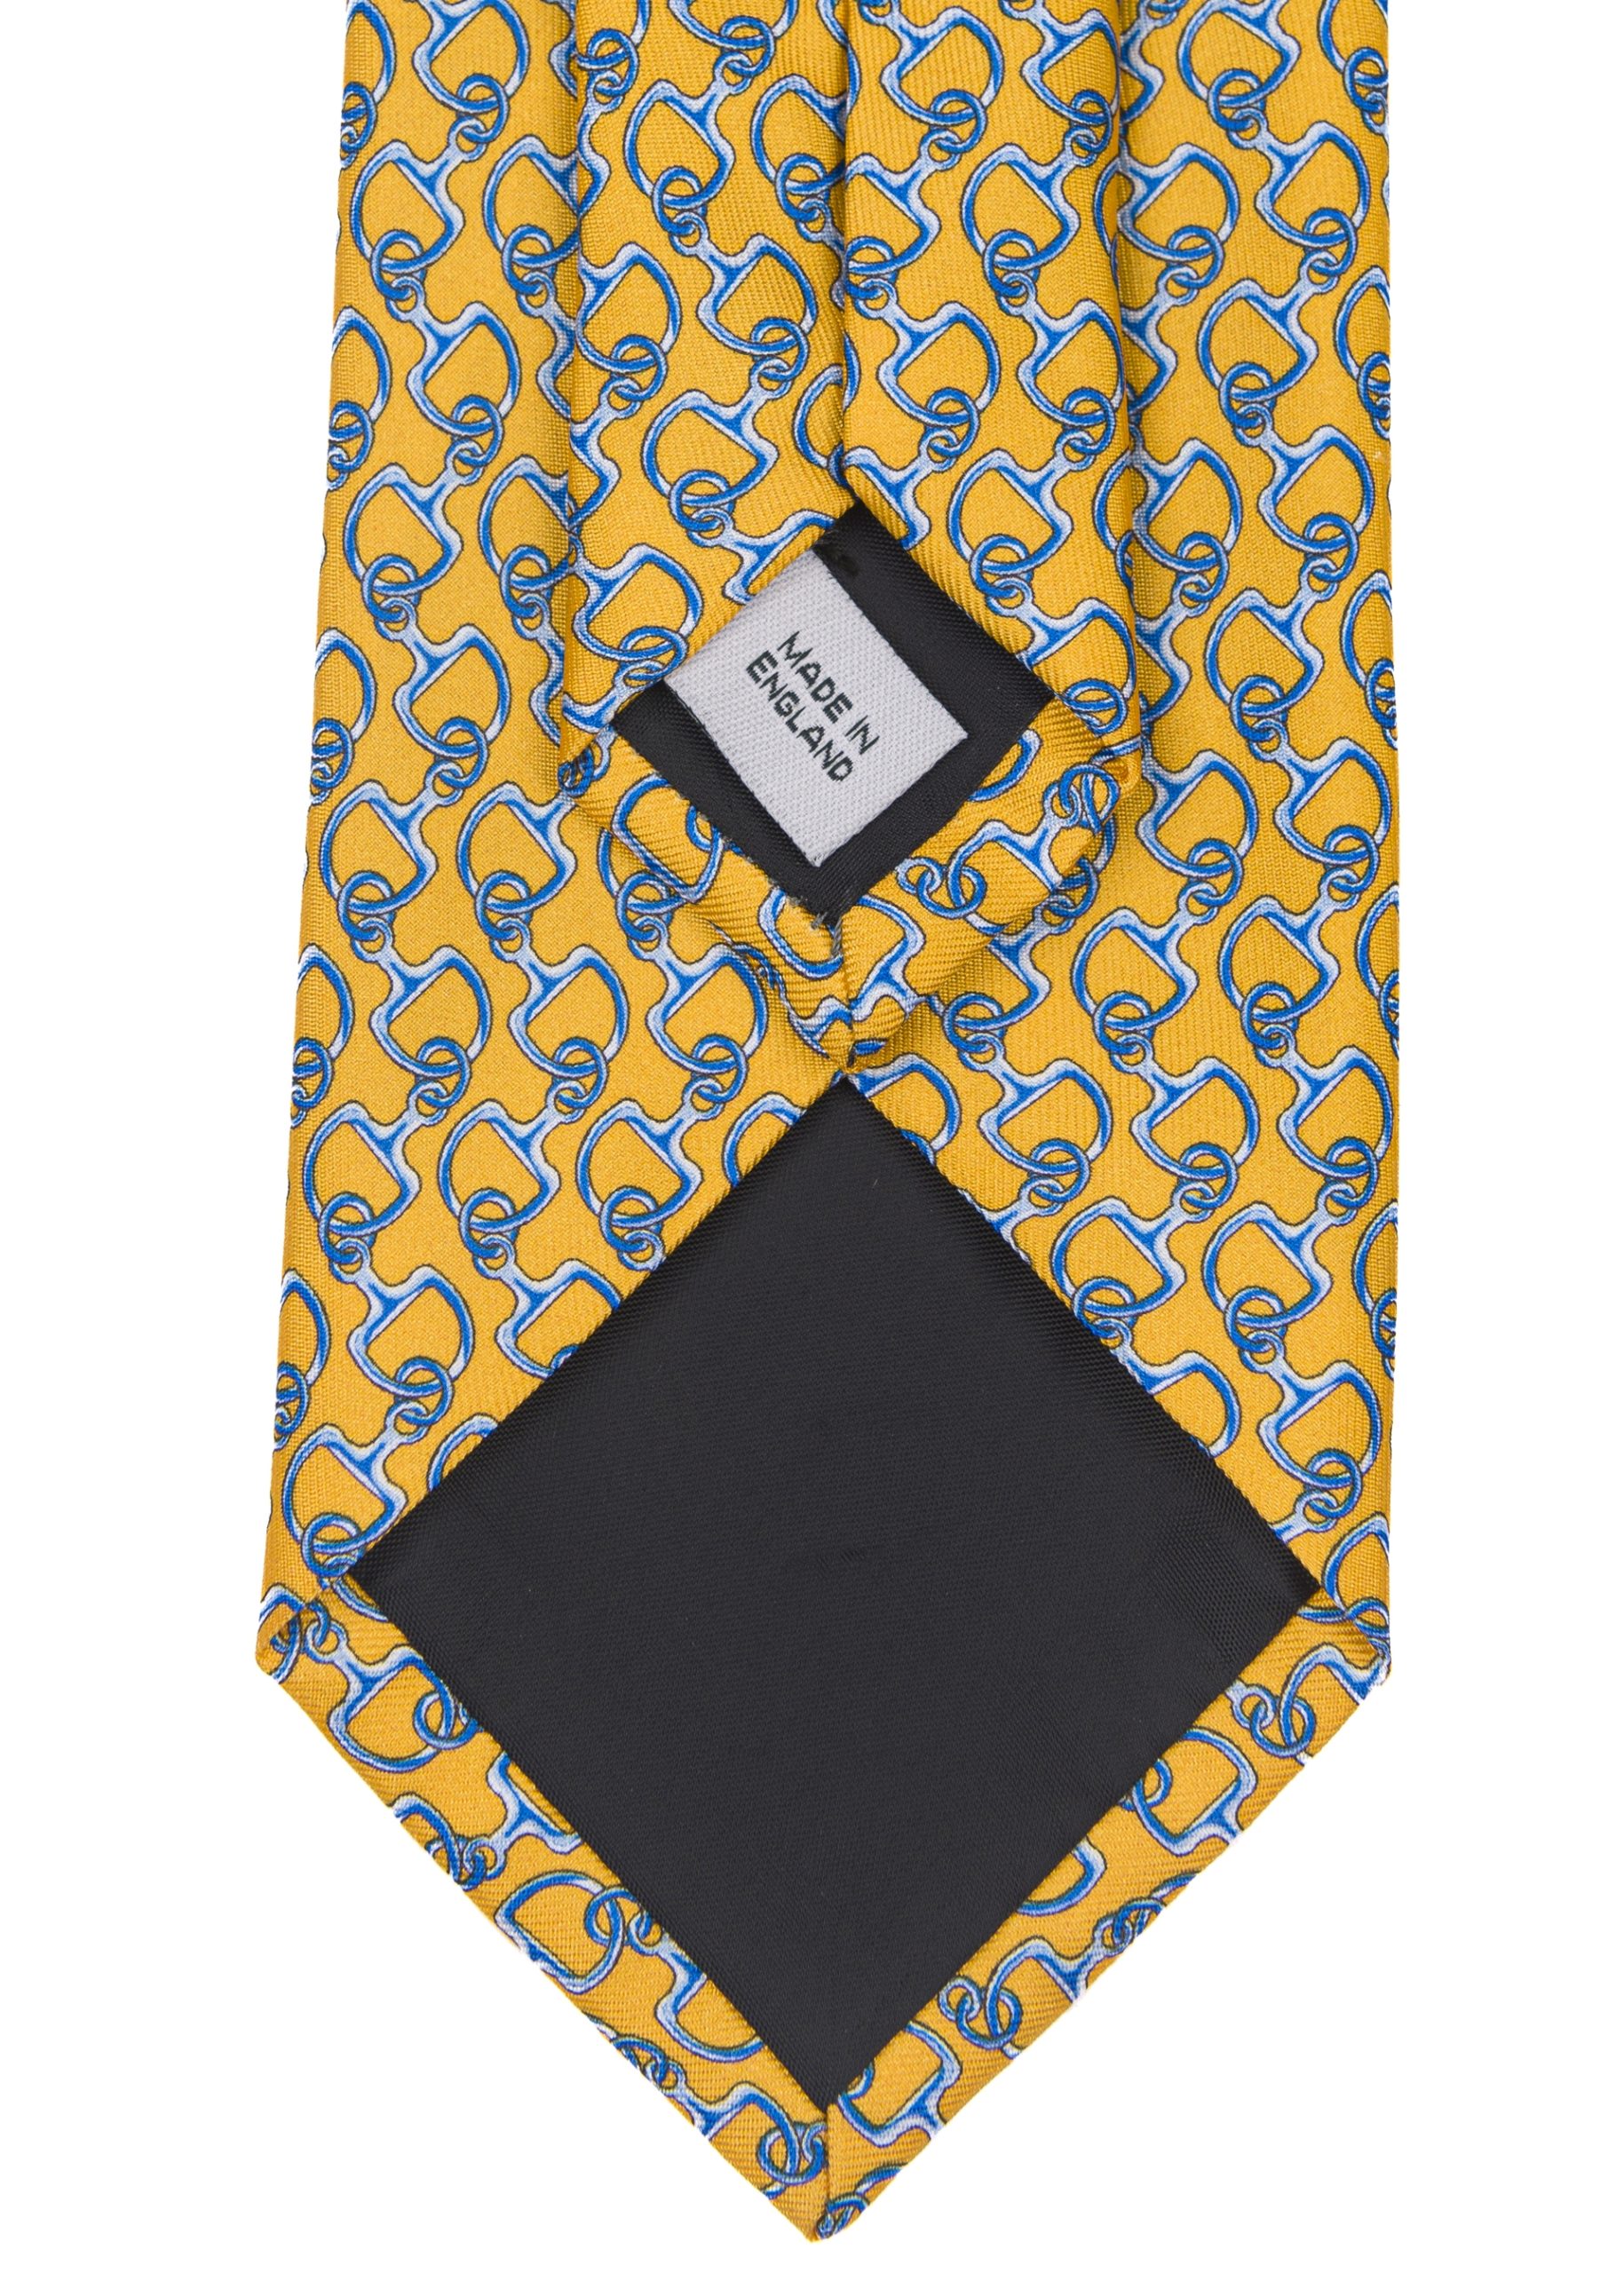 Roderick Charles patterned yellow and blue tie